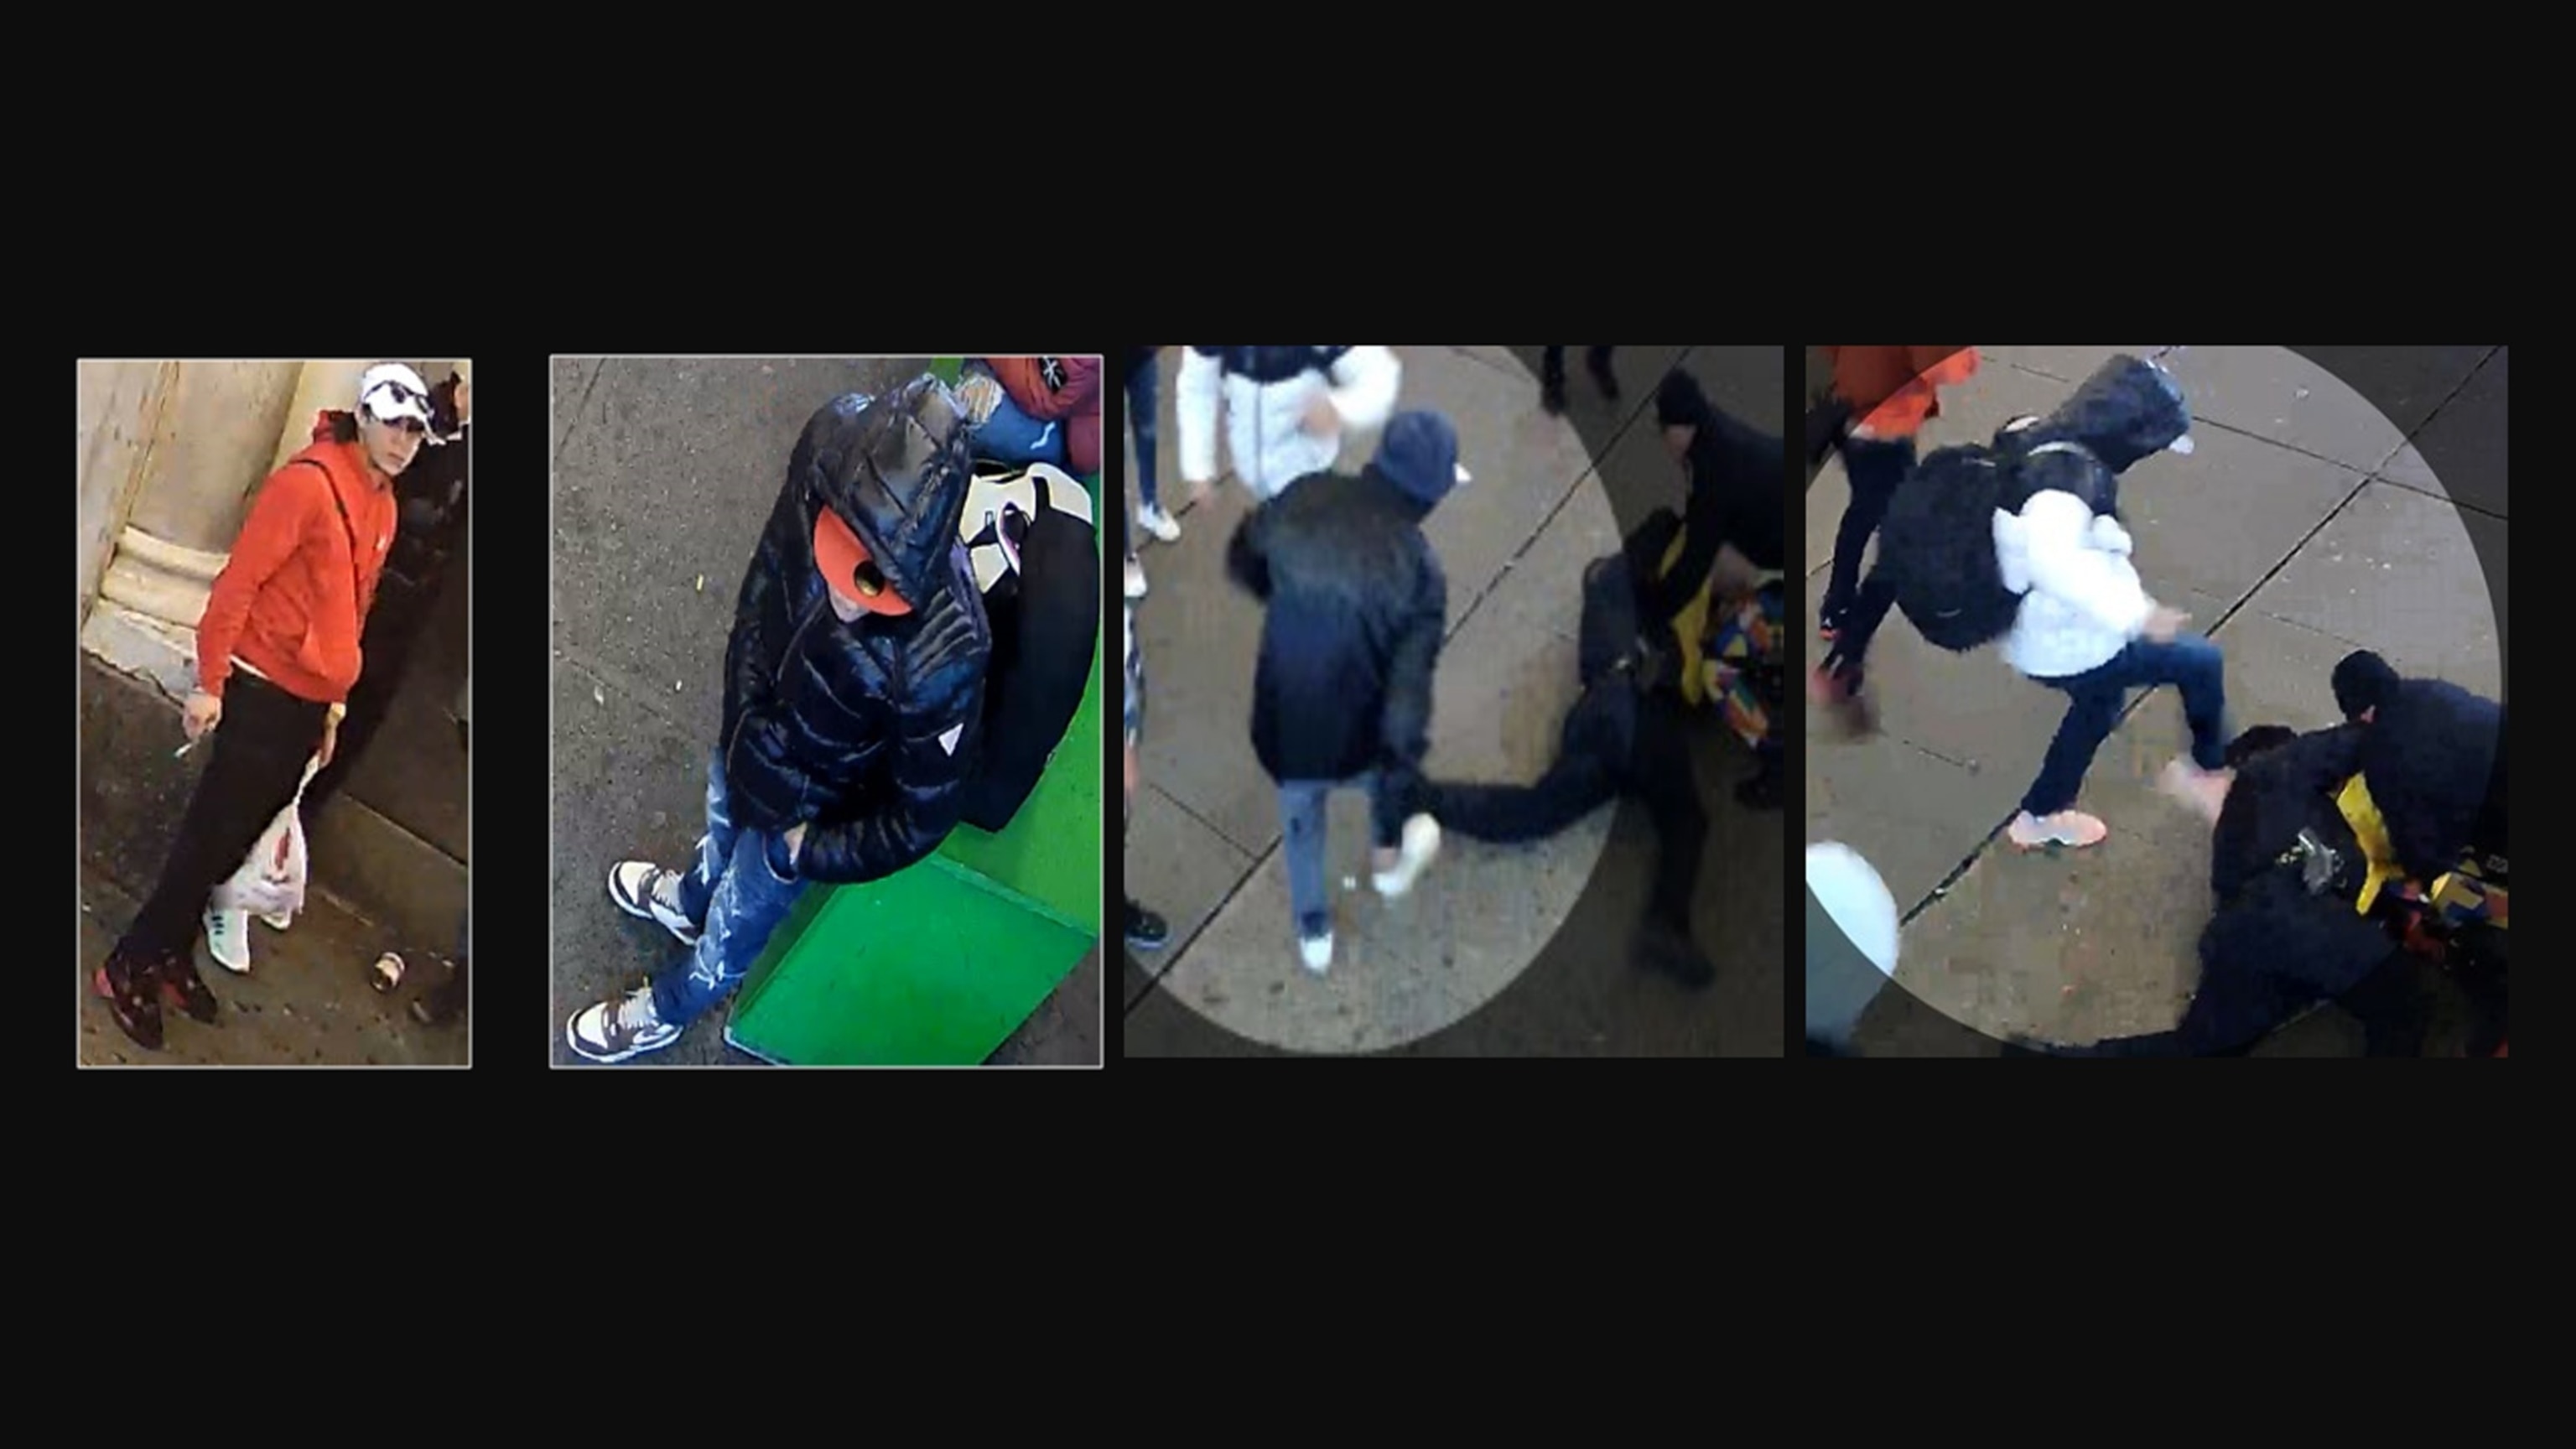 PHOTO: The suspects involved in the attack on police officers near Times Square on Jan. 27 were captured on surveillance images.